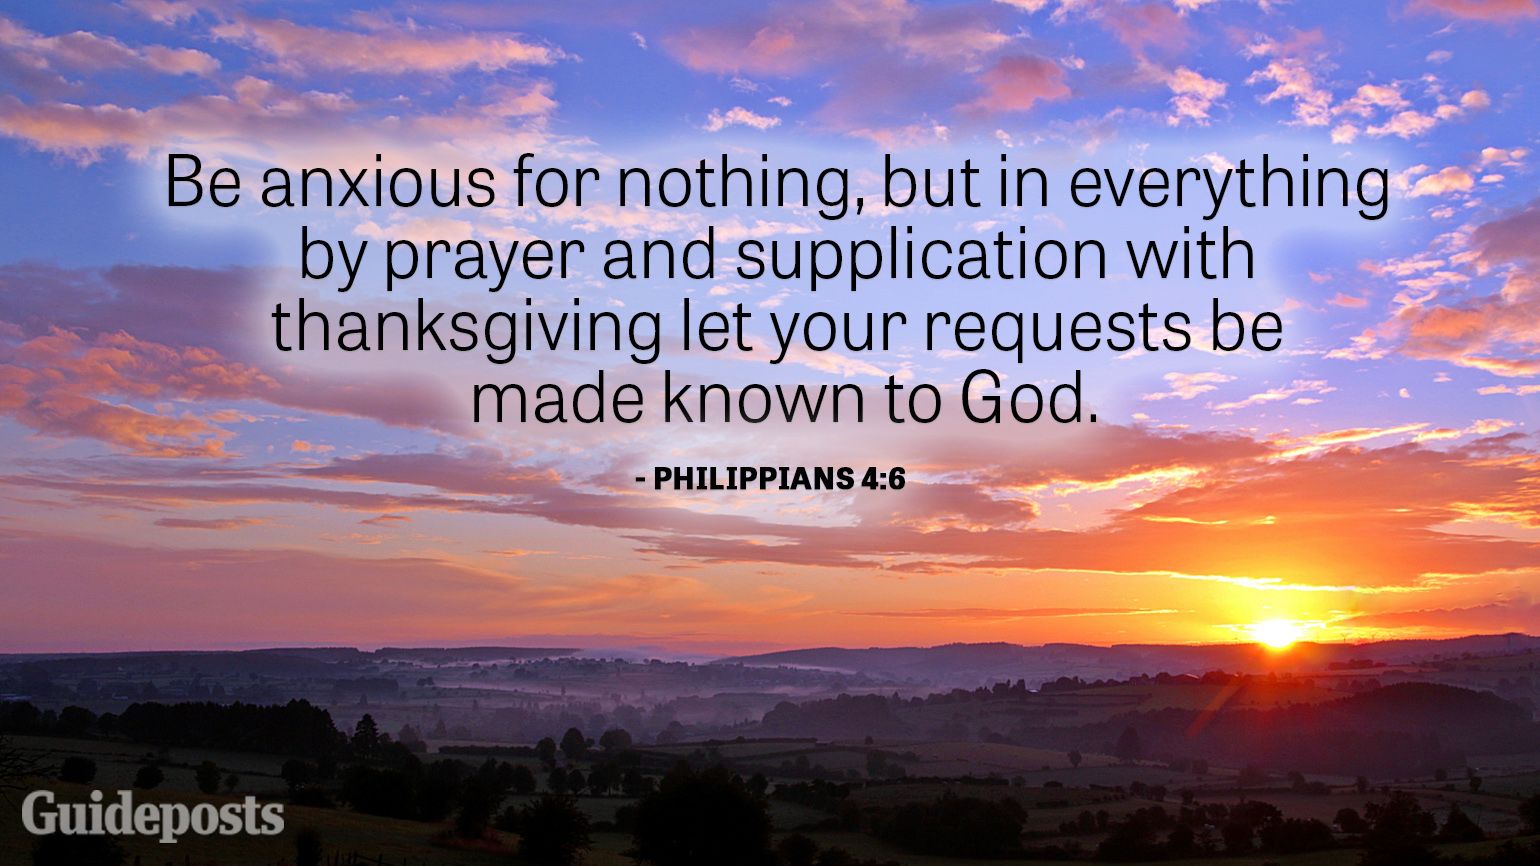 Be anxious for nothing, but in everything by prayer and supplication with thanksgiving let your requests be made known to God.